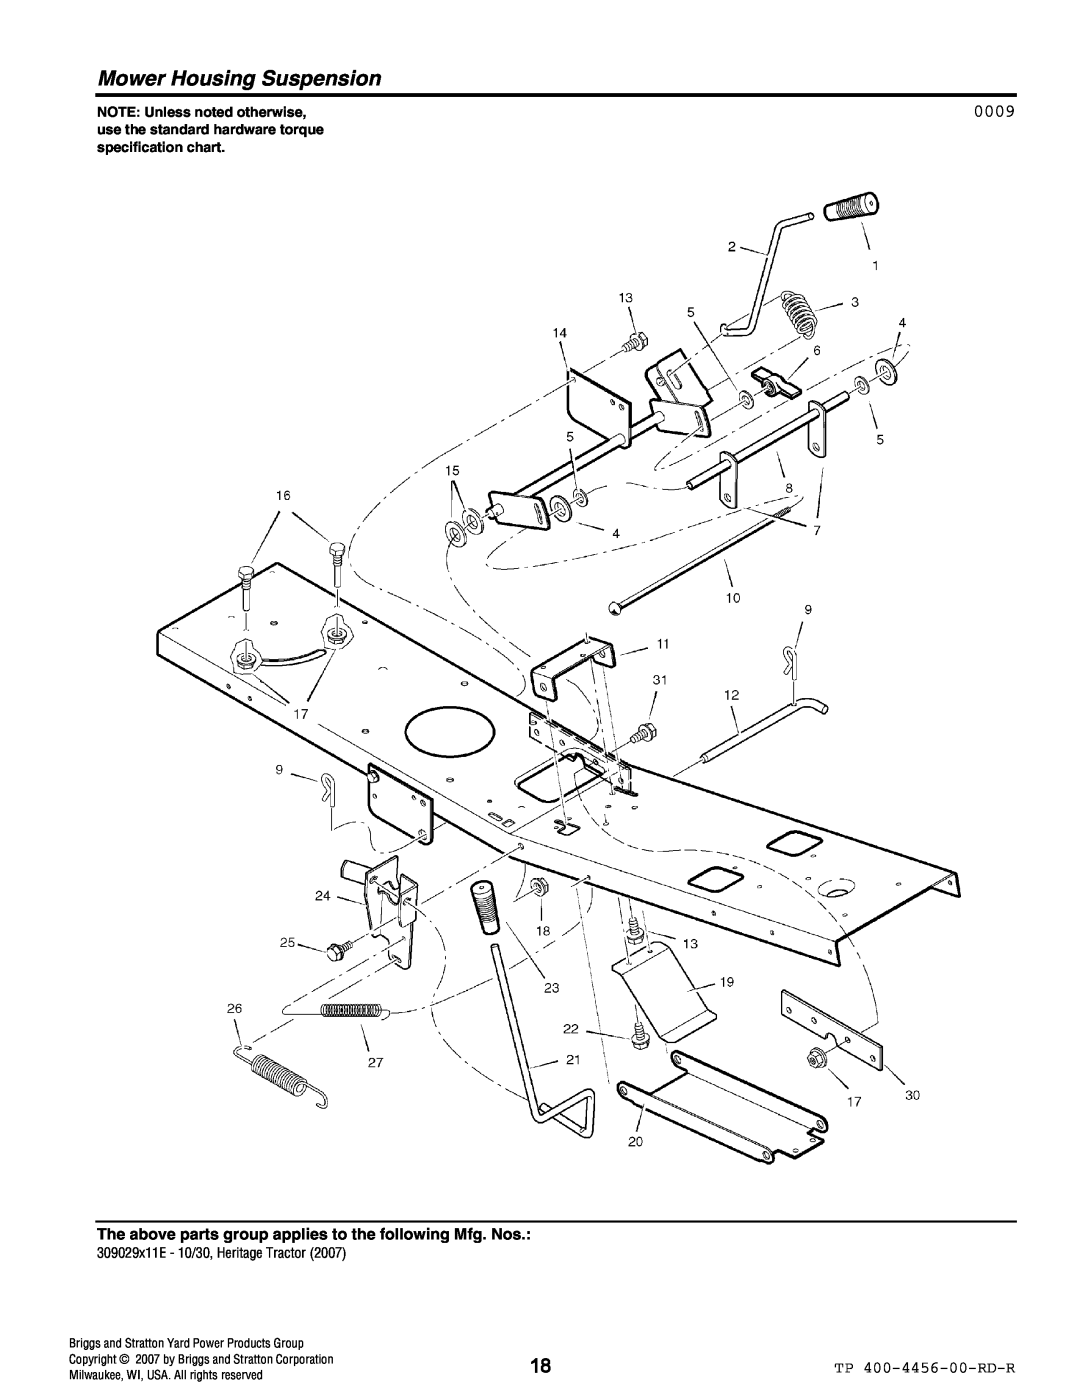 Hayter Mowers 10/30 manual Mower Housing Suspension, 0009, TP 400-4456-00-RD-R, NOTE: Unless noted otherwise 